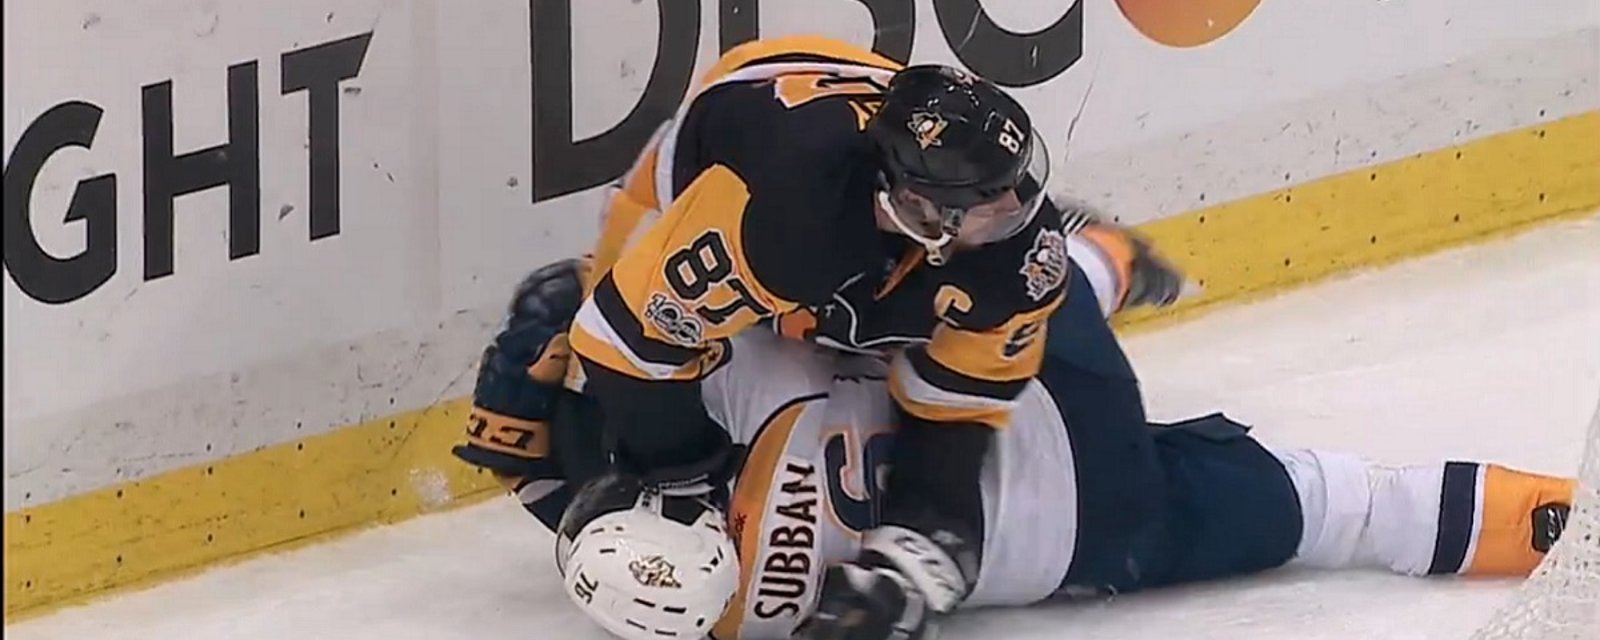 Breaking: Crosby punches Subban in the head while he's down on the ice.